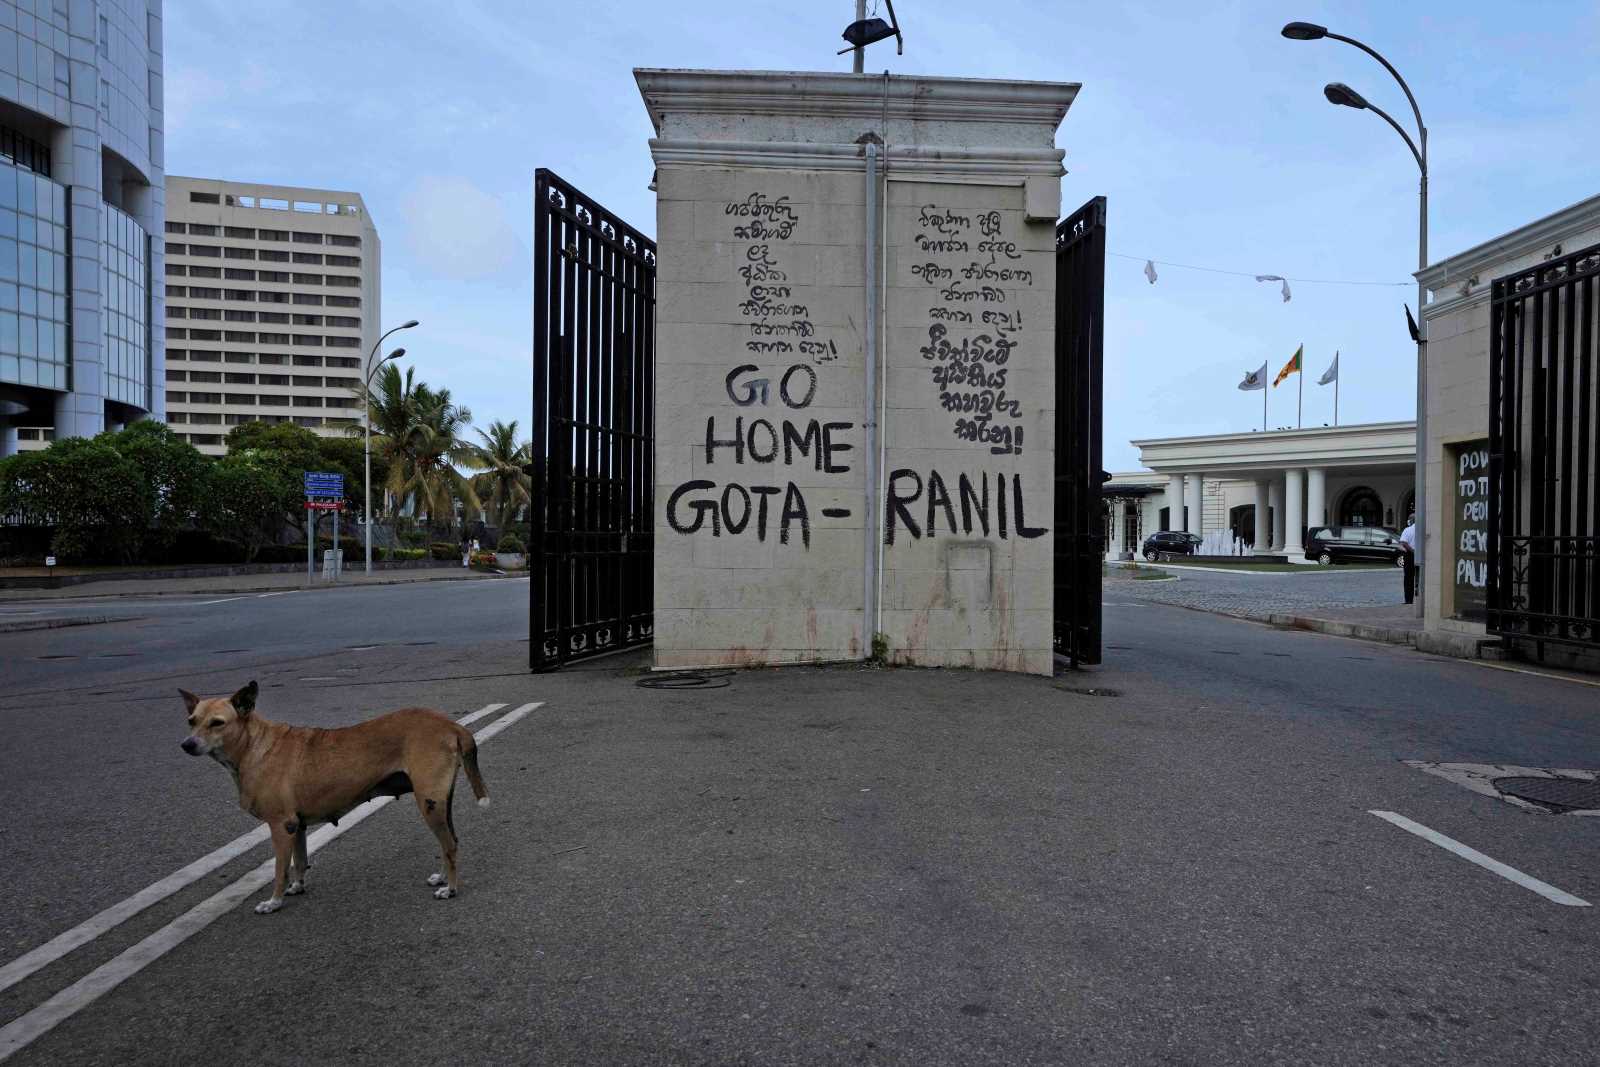 Protesters wanted neither Gotabaya Rajapaksa nor Ranil Wickremesinghe to stay – graffiti in Colombo in mid-July.